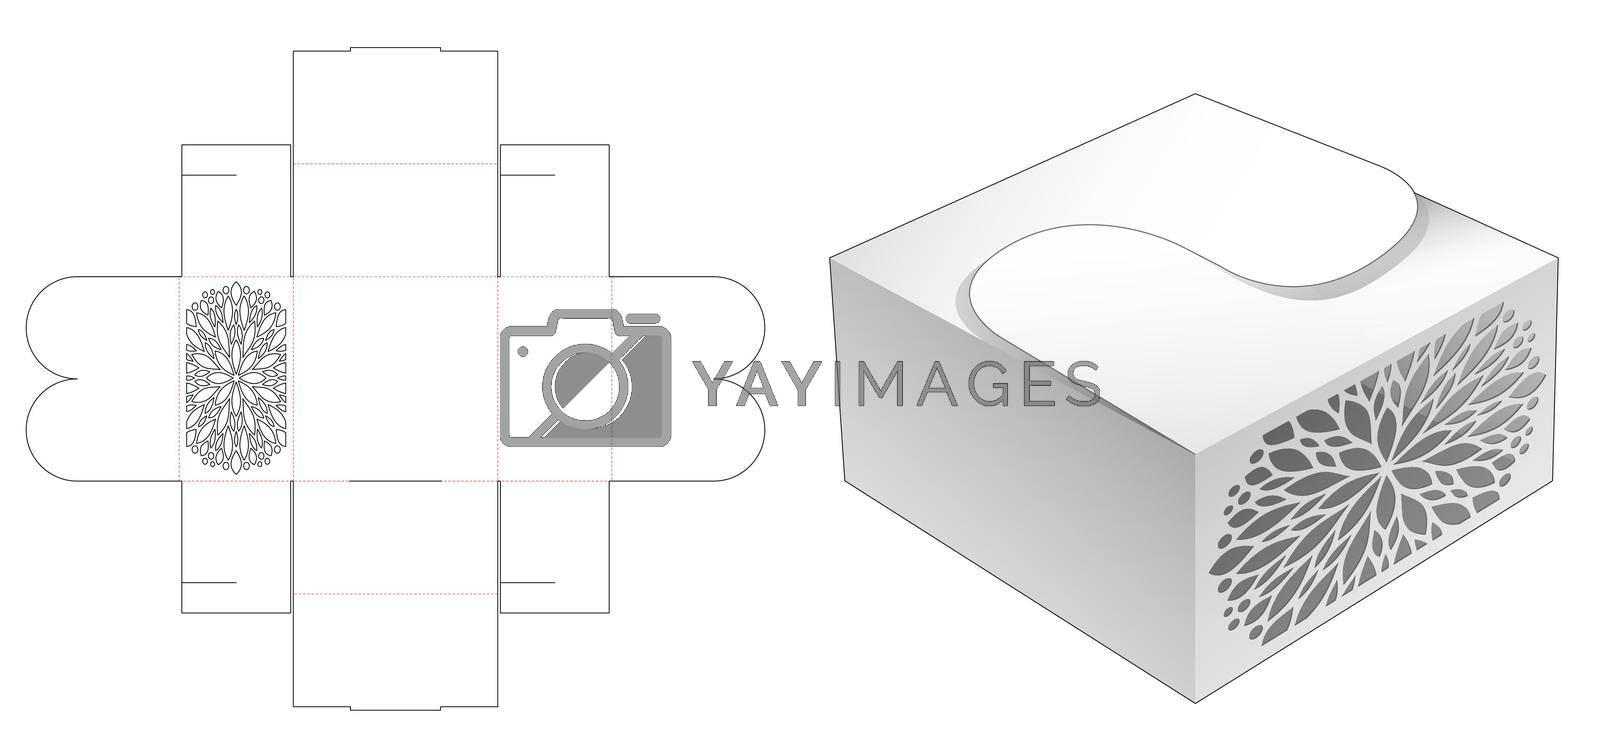 Royalty free image of Stenciled bakery box die cut template and 3D mockup by valueinvestor